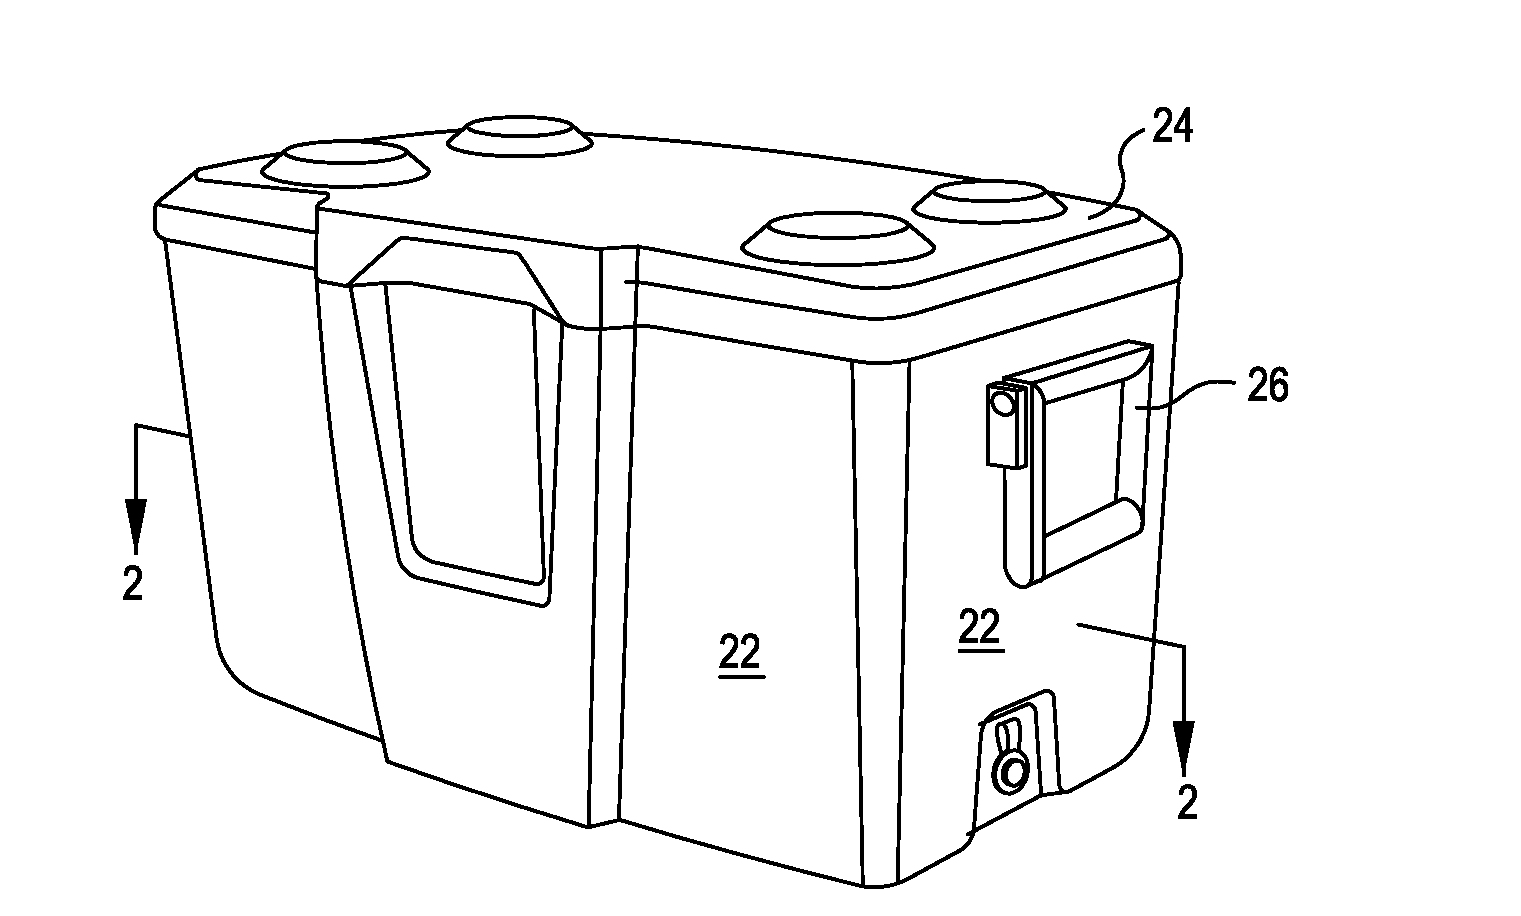 Insulated container utilizing non-contact cooling